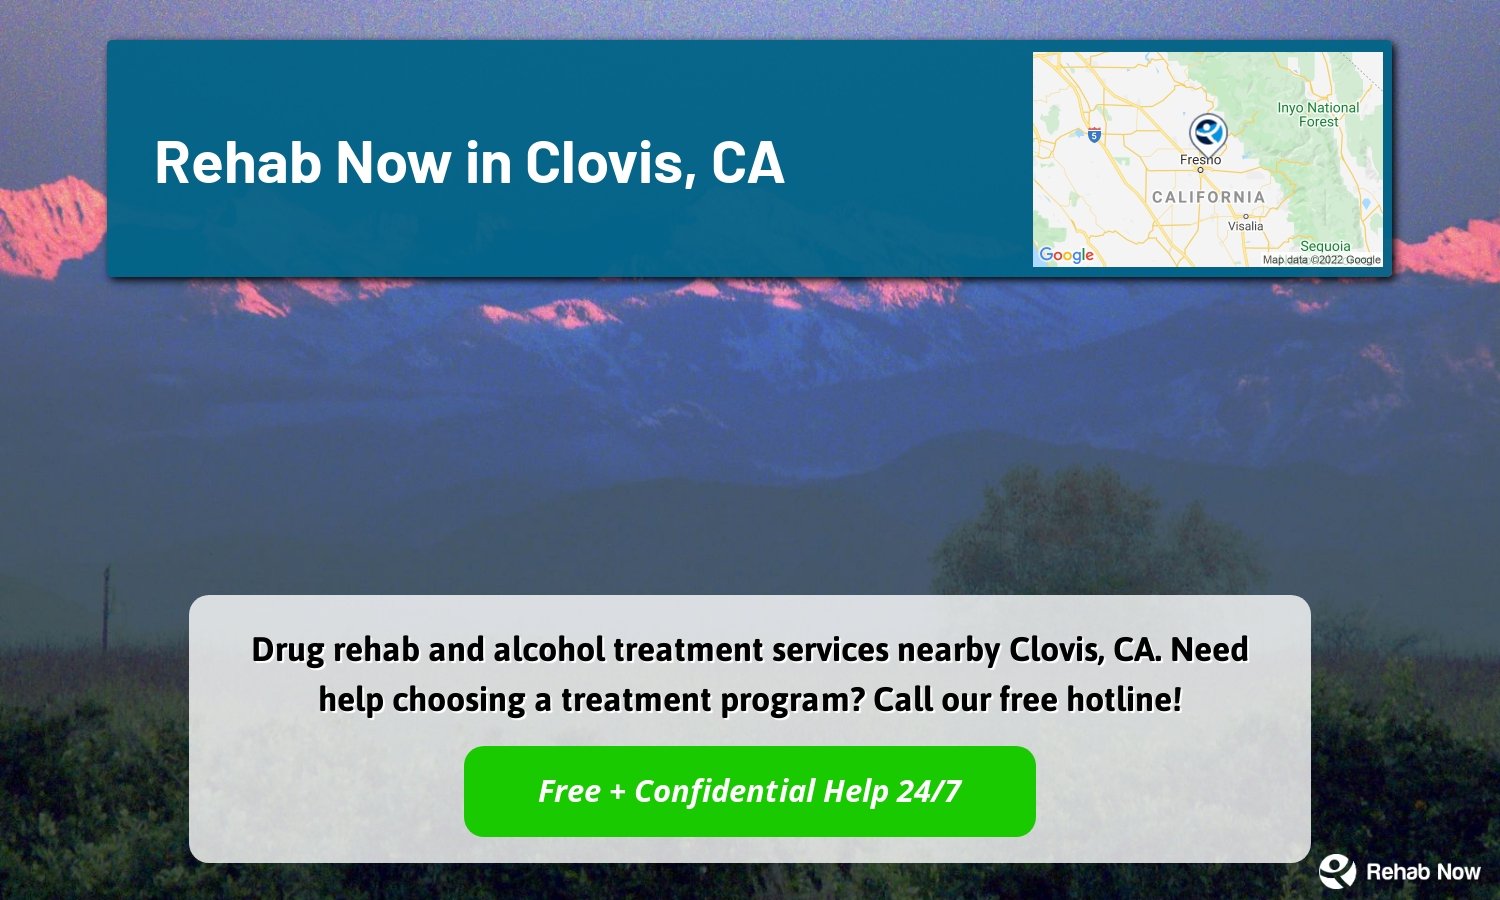 Drug rehab and alcohol treatment services nearby Clovis, CA. Need help choosing a treatment program? Call our free hotline!